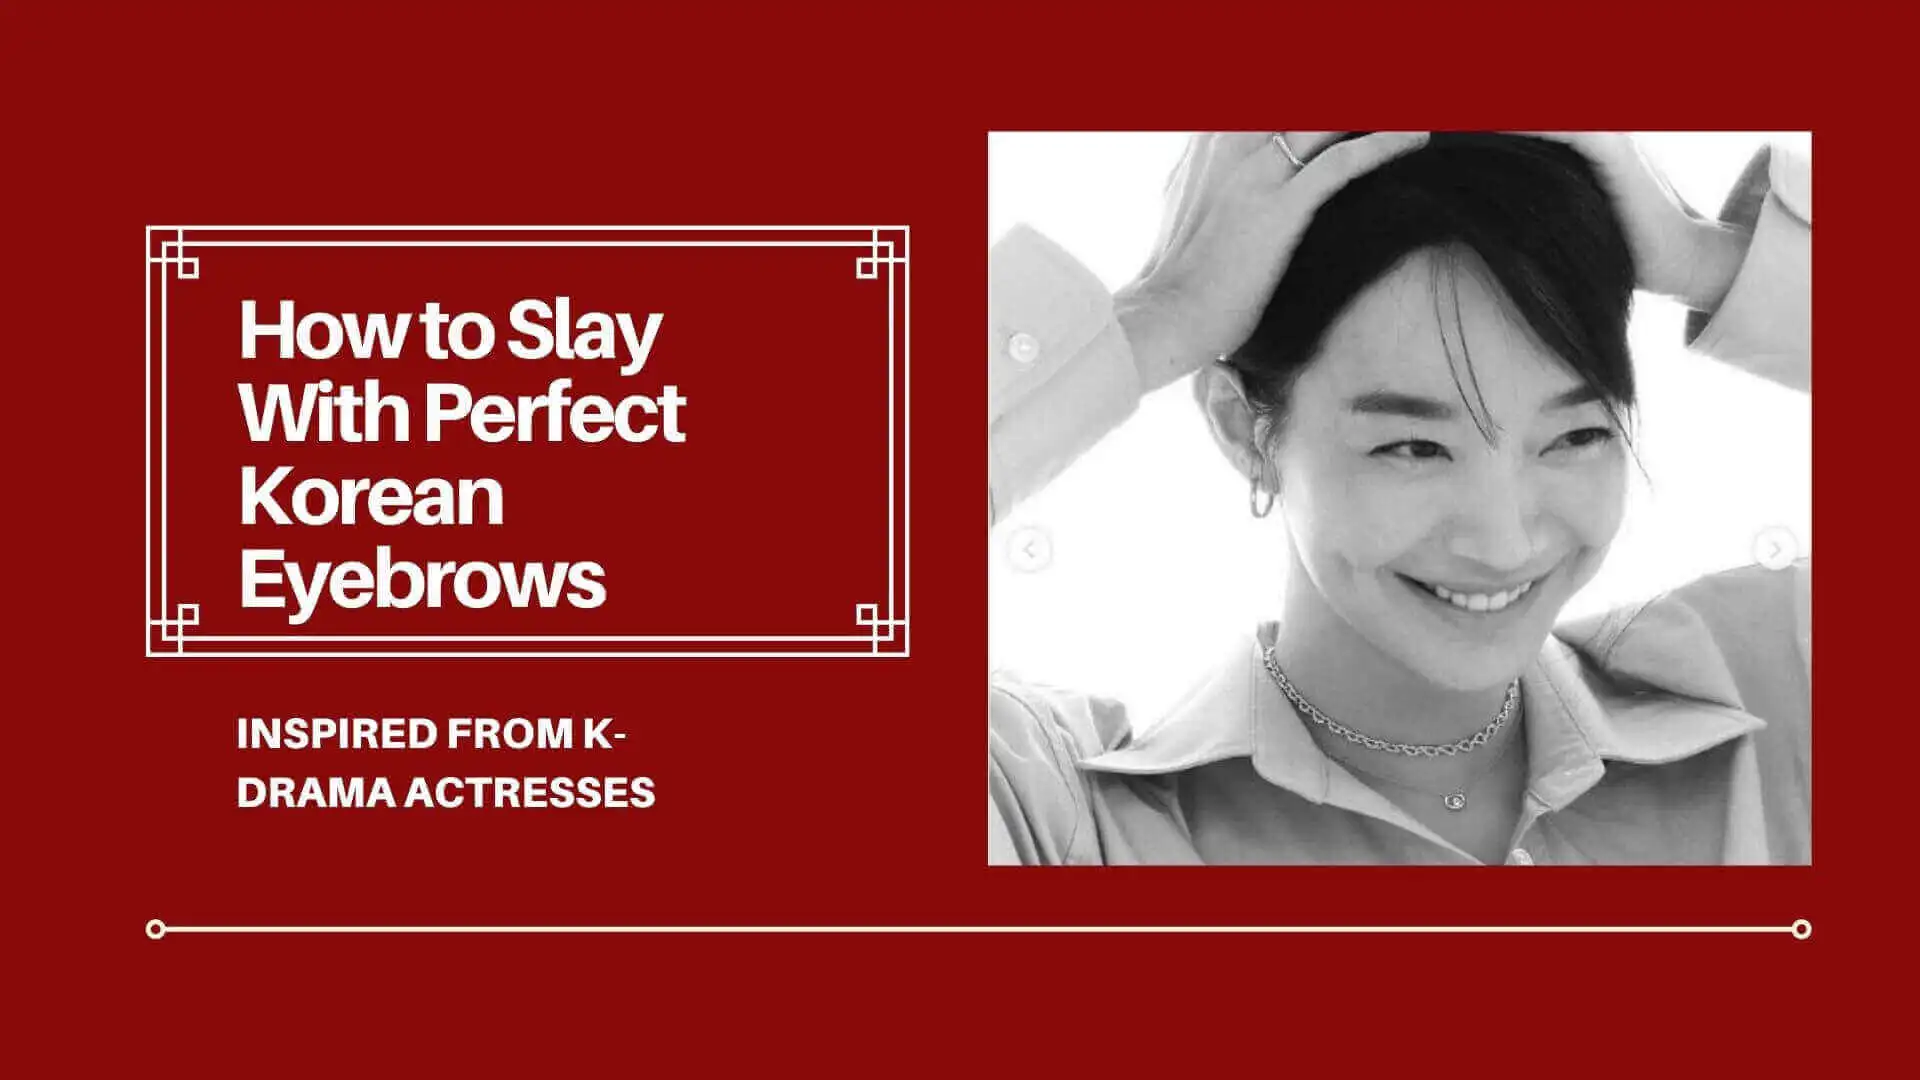 How to slay with perfect korean eyebrows